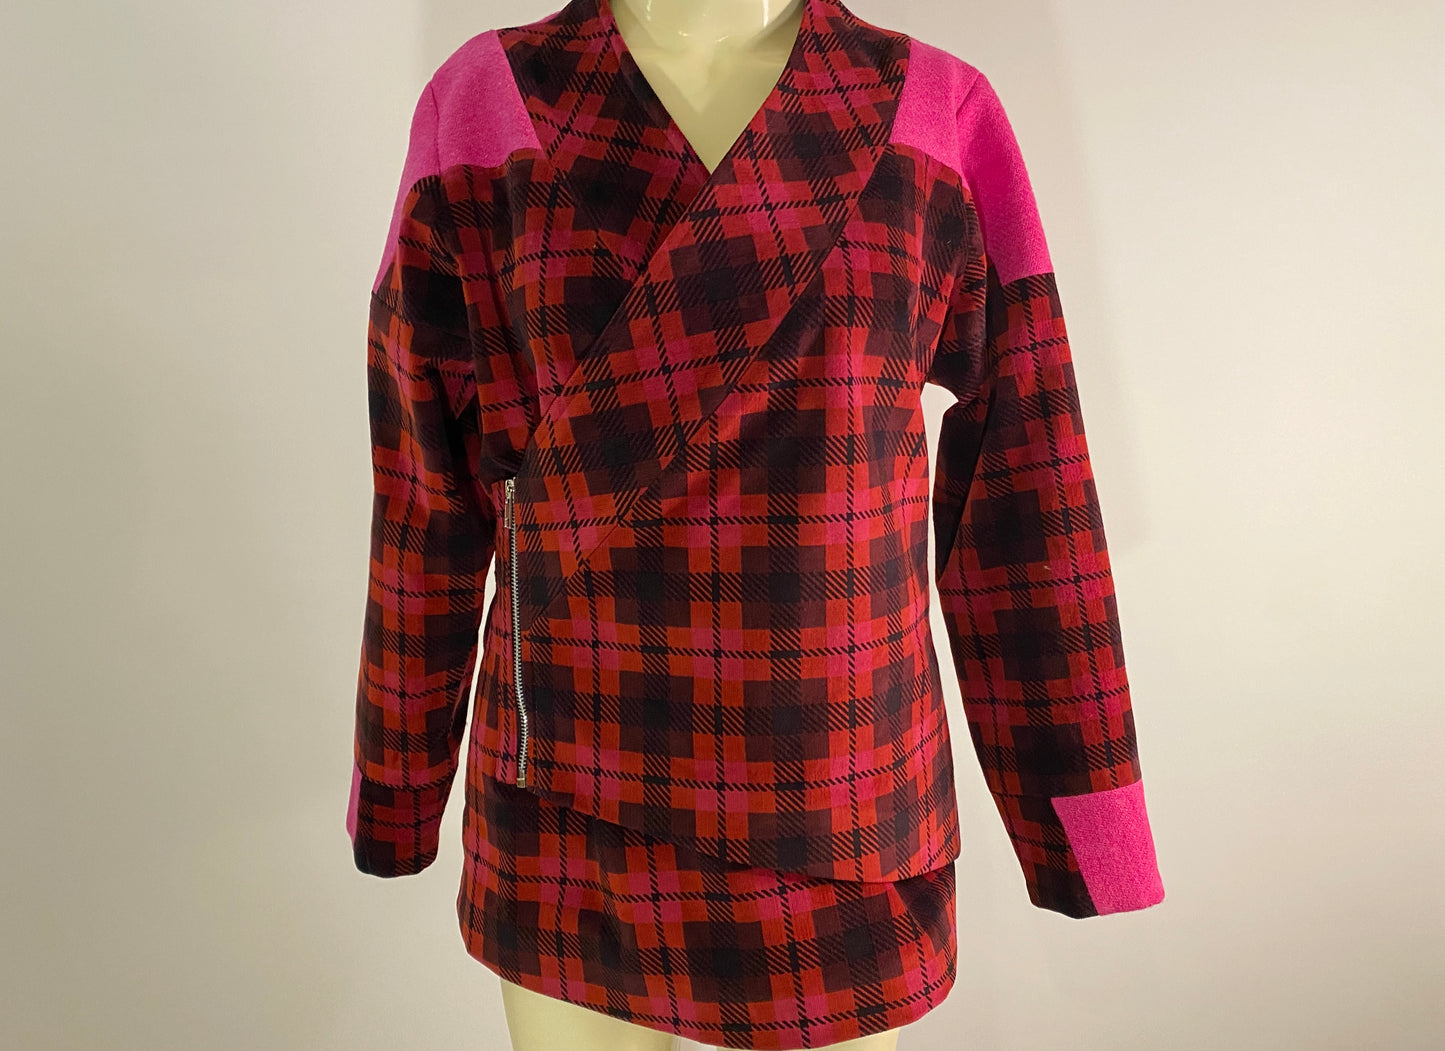 Canna Jacket in a Geometric Patterned Corduroy w Hot Pink